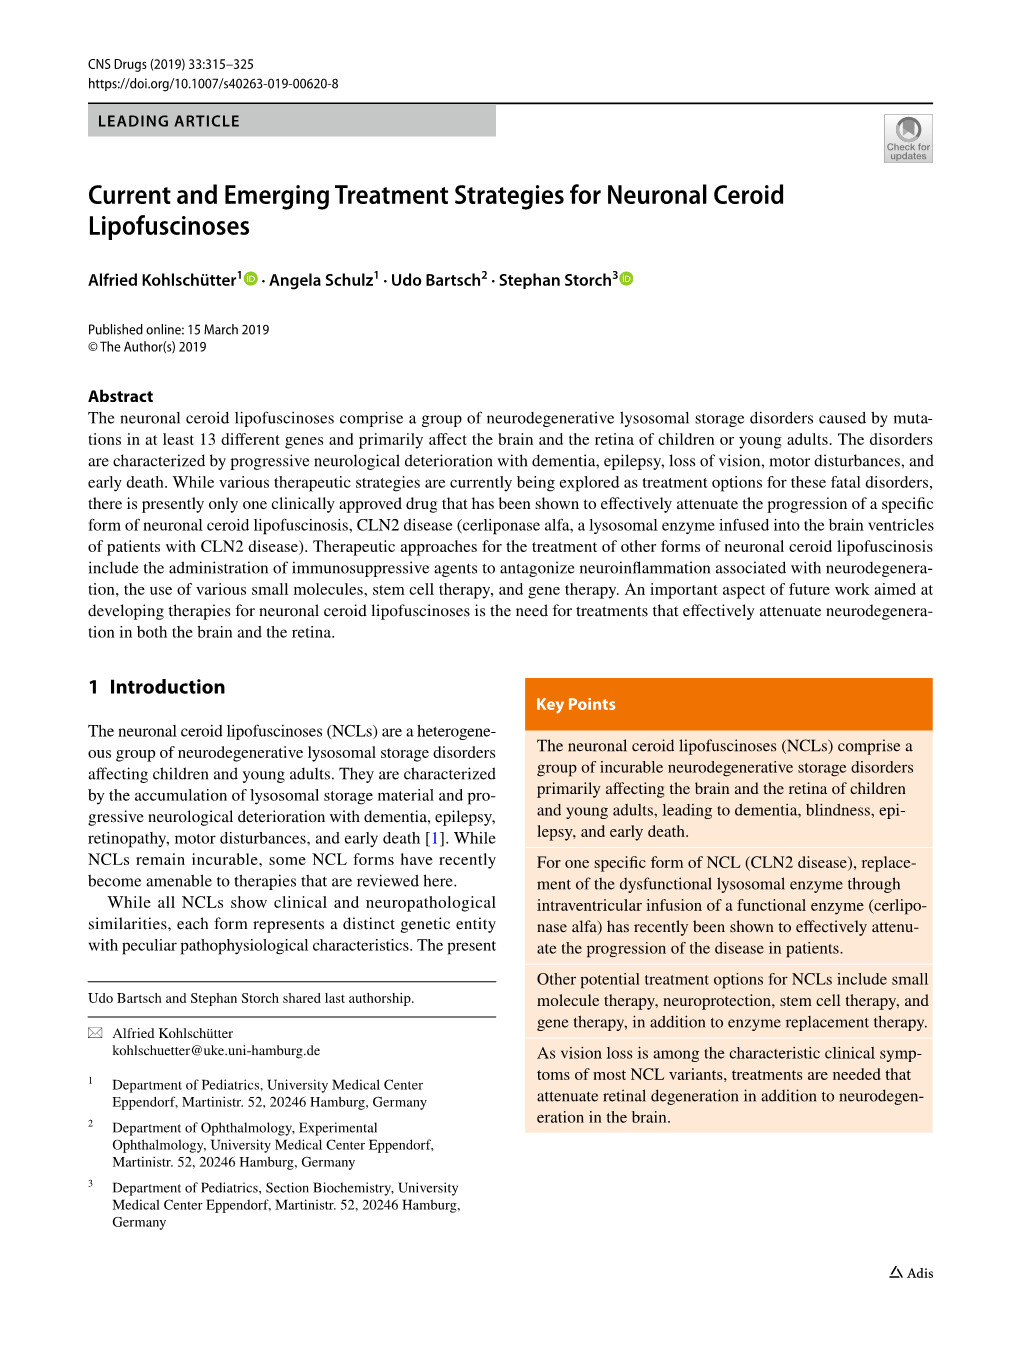 Current and Emerging Treatment Strategies for Neuronal Ceroid Lipofuscinoses